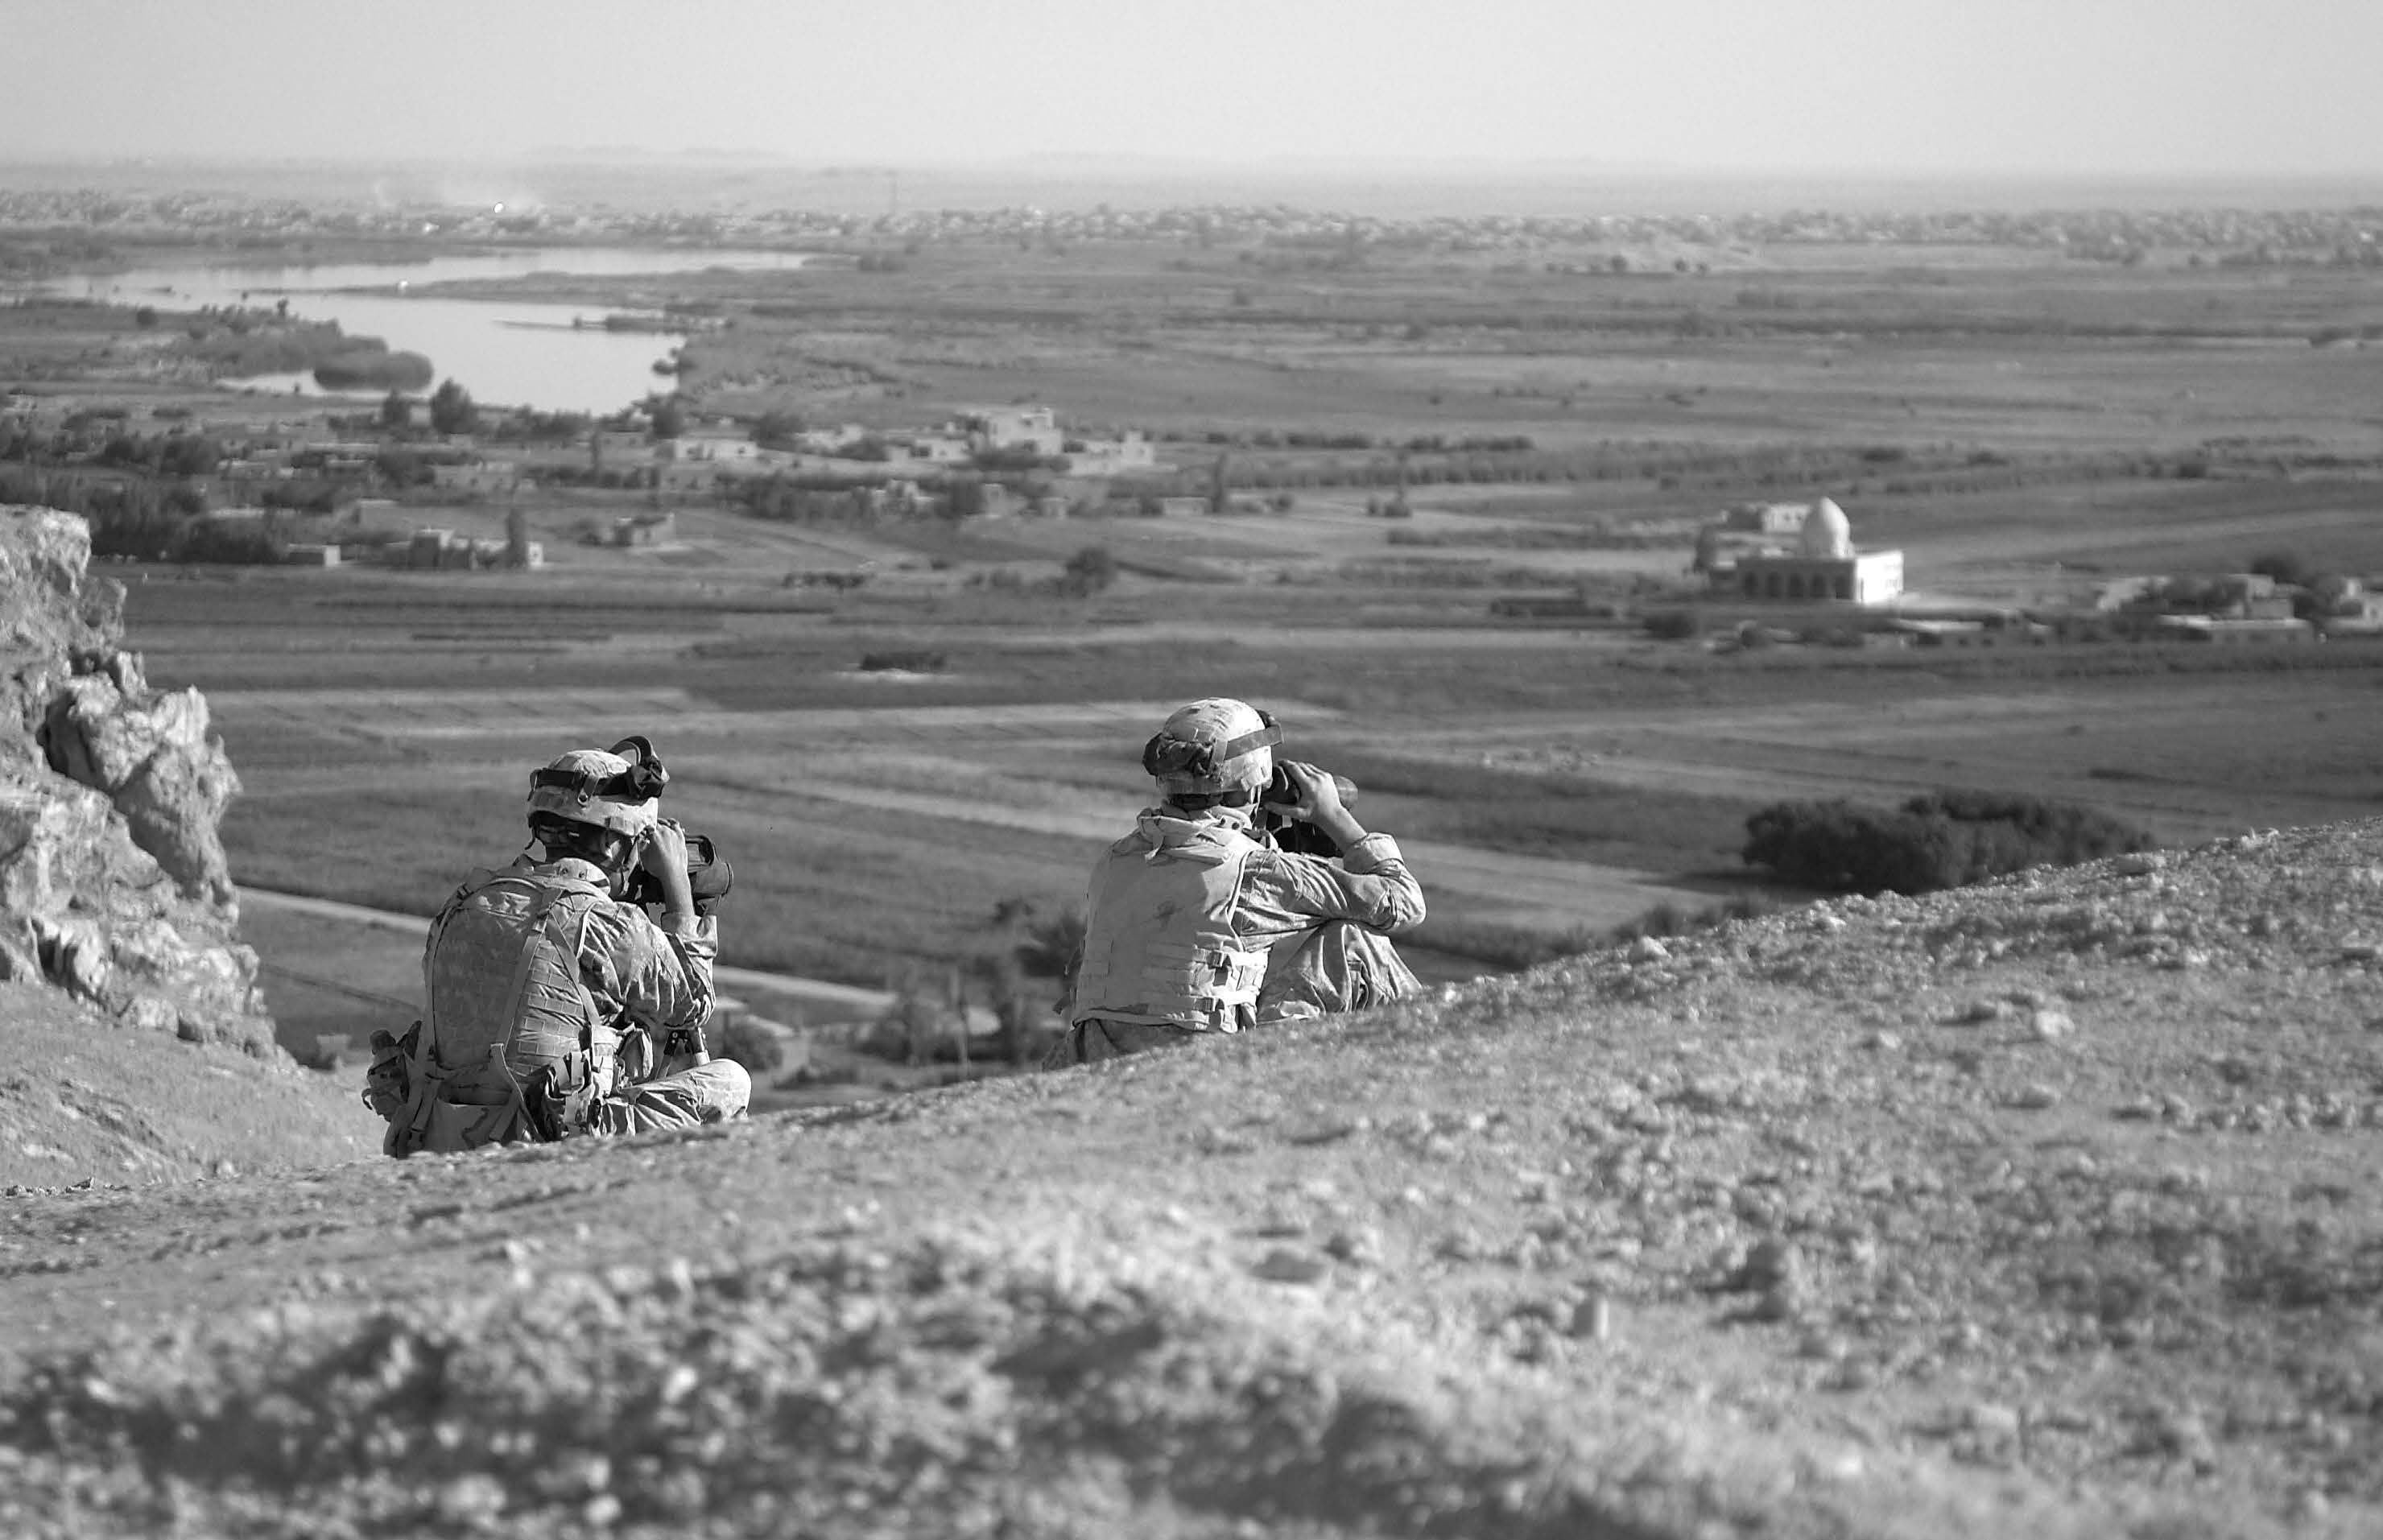 U.S. Army soldiers with the 14th Cavalry Regiment from Fort Wainwright, Alaska, near the Syrian border monitor the movement of local Iraqis by the Euphrates River in Iraq on October 2, 2005. Courtesy of DoD.